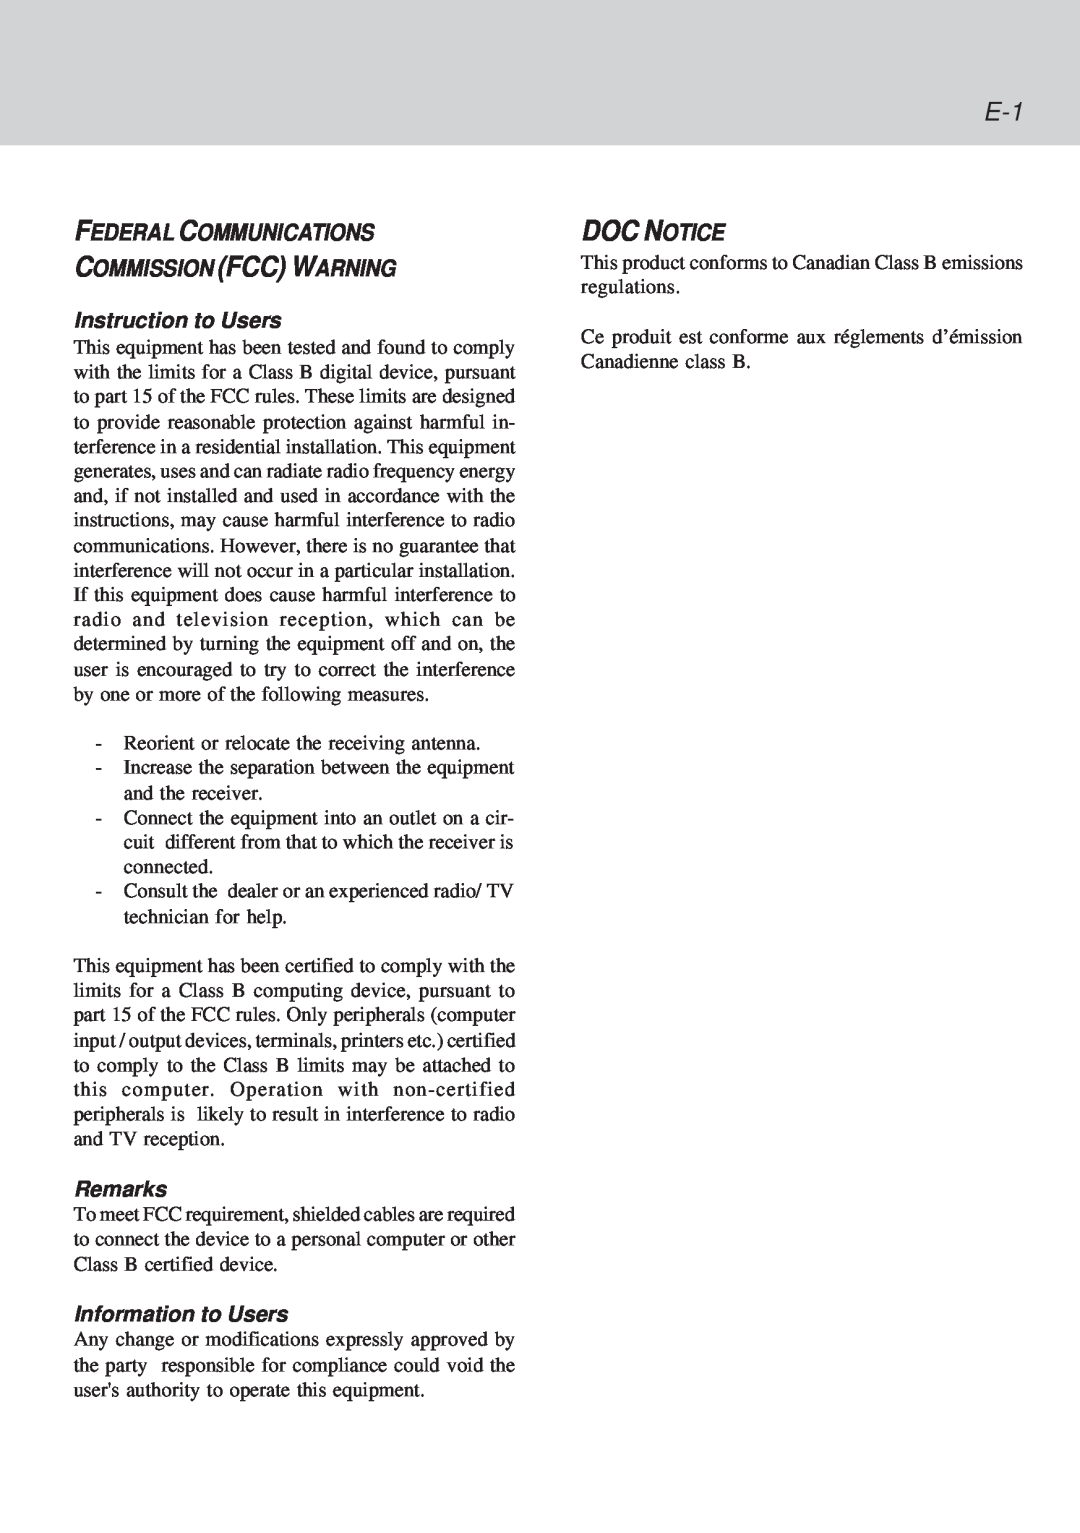 Lenovo C51 manual Doc Notice, Federal Communications Commission Fcc Warning, Instruction to Users, Remarks 